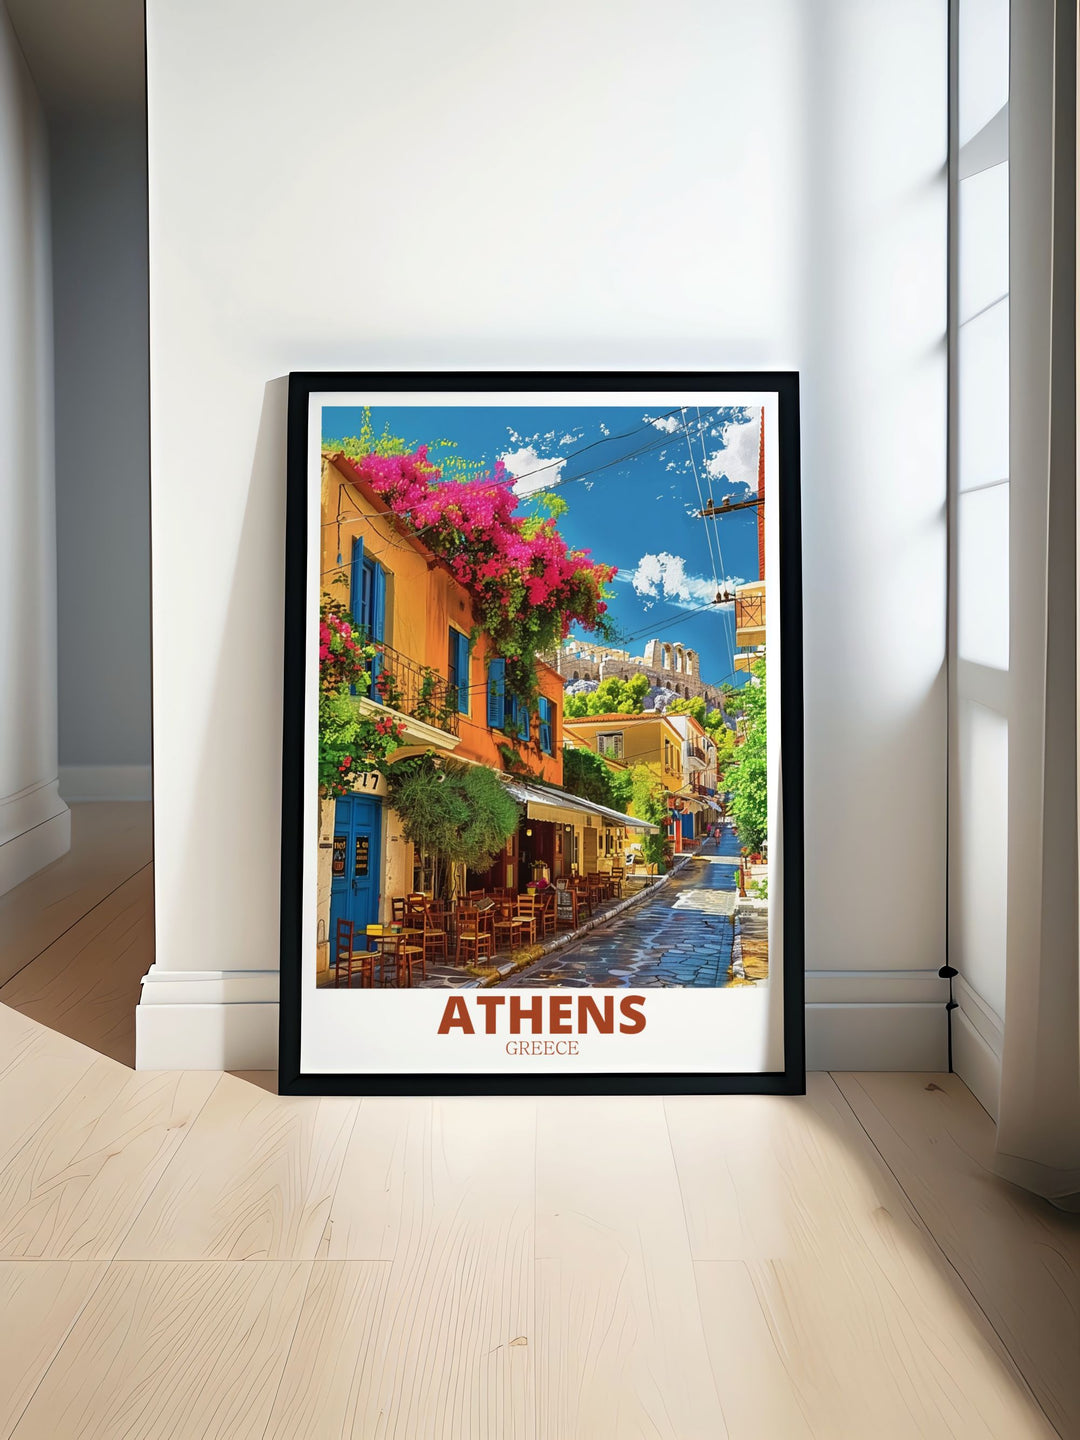 Athens Wall Art featuring PlakaNeighborhood showcasing the vibrant charm of cobblestone streets and traditional houses perfect for home decor and traveler gifts adding a touch of Greek culture to any space